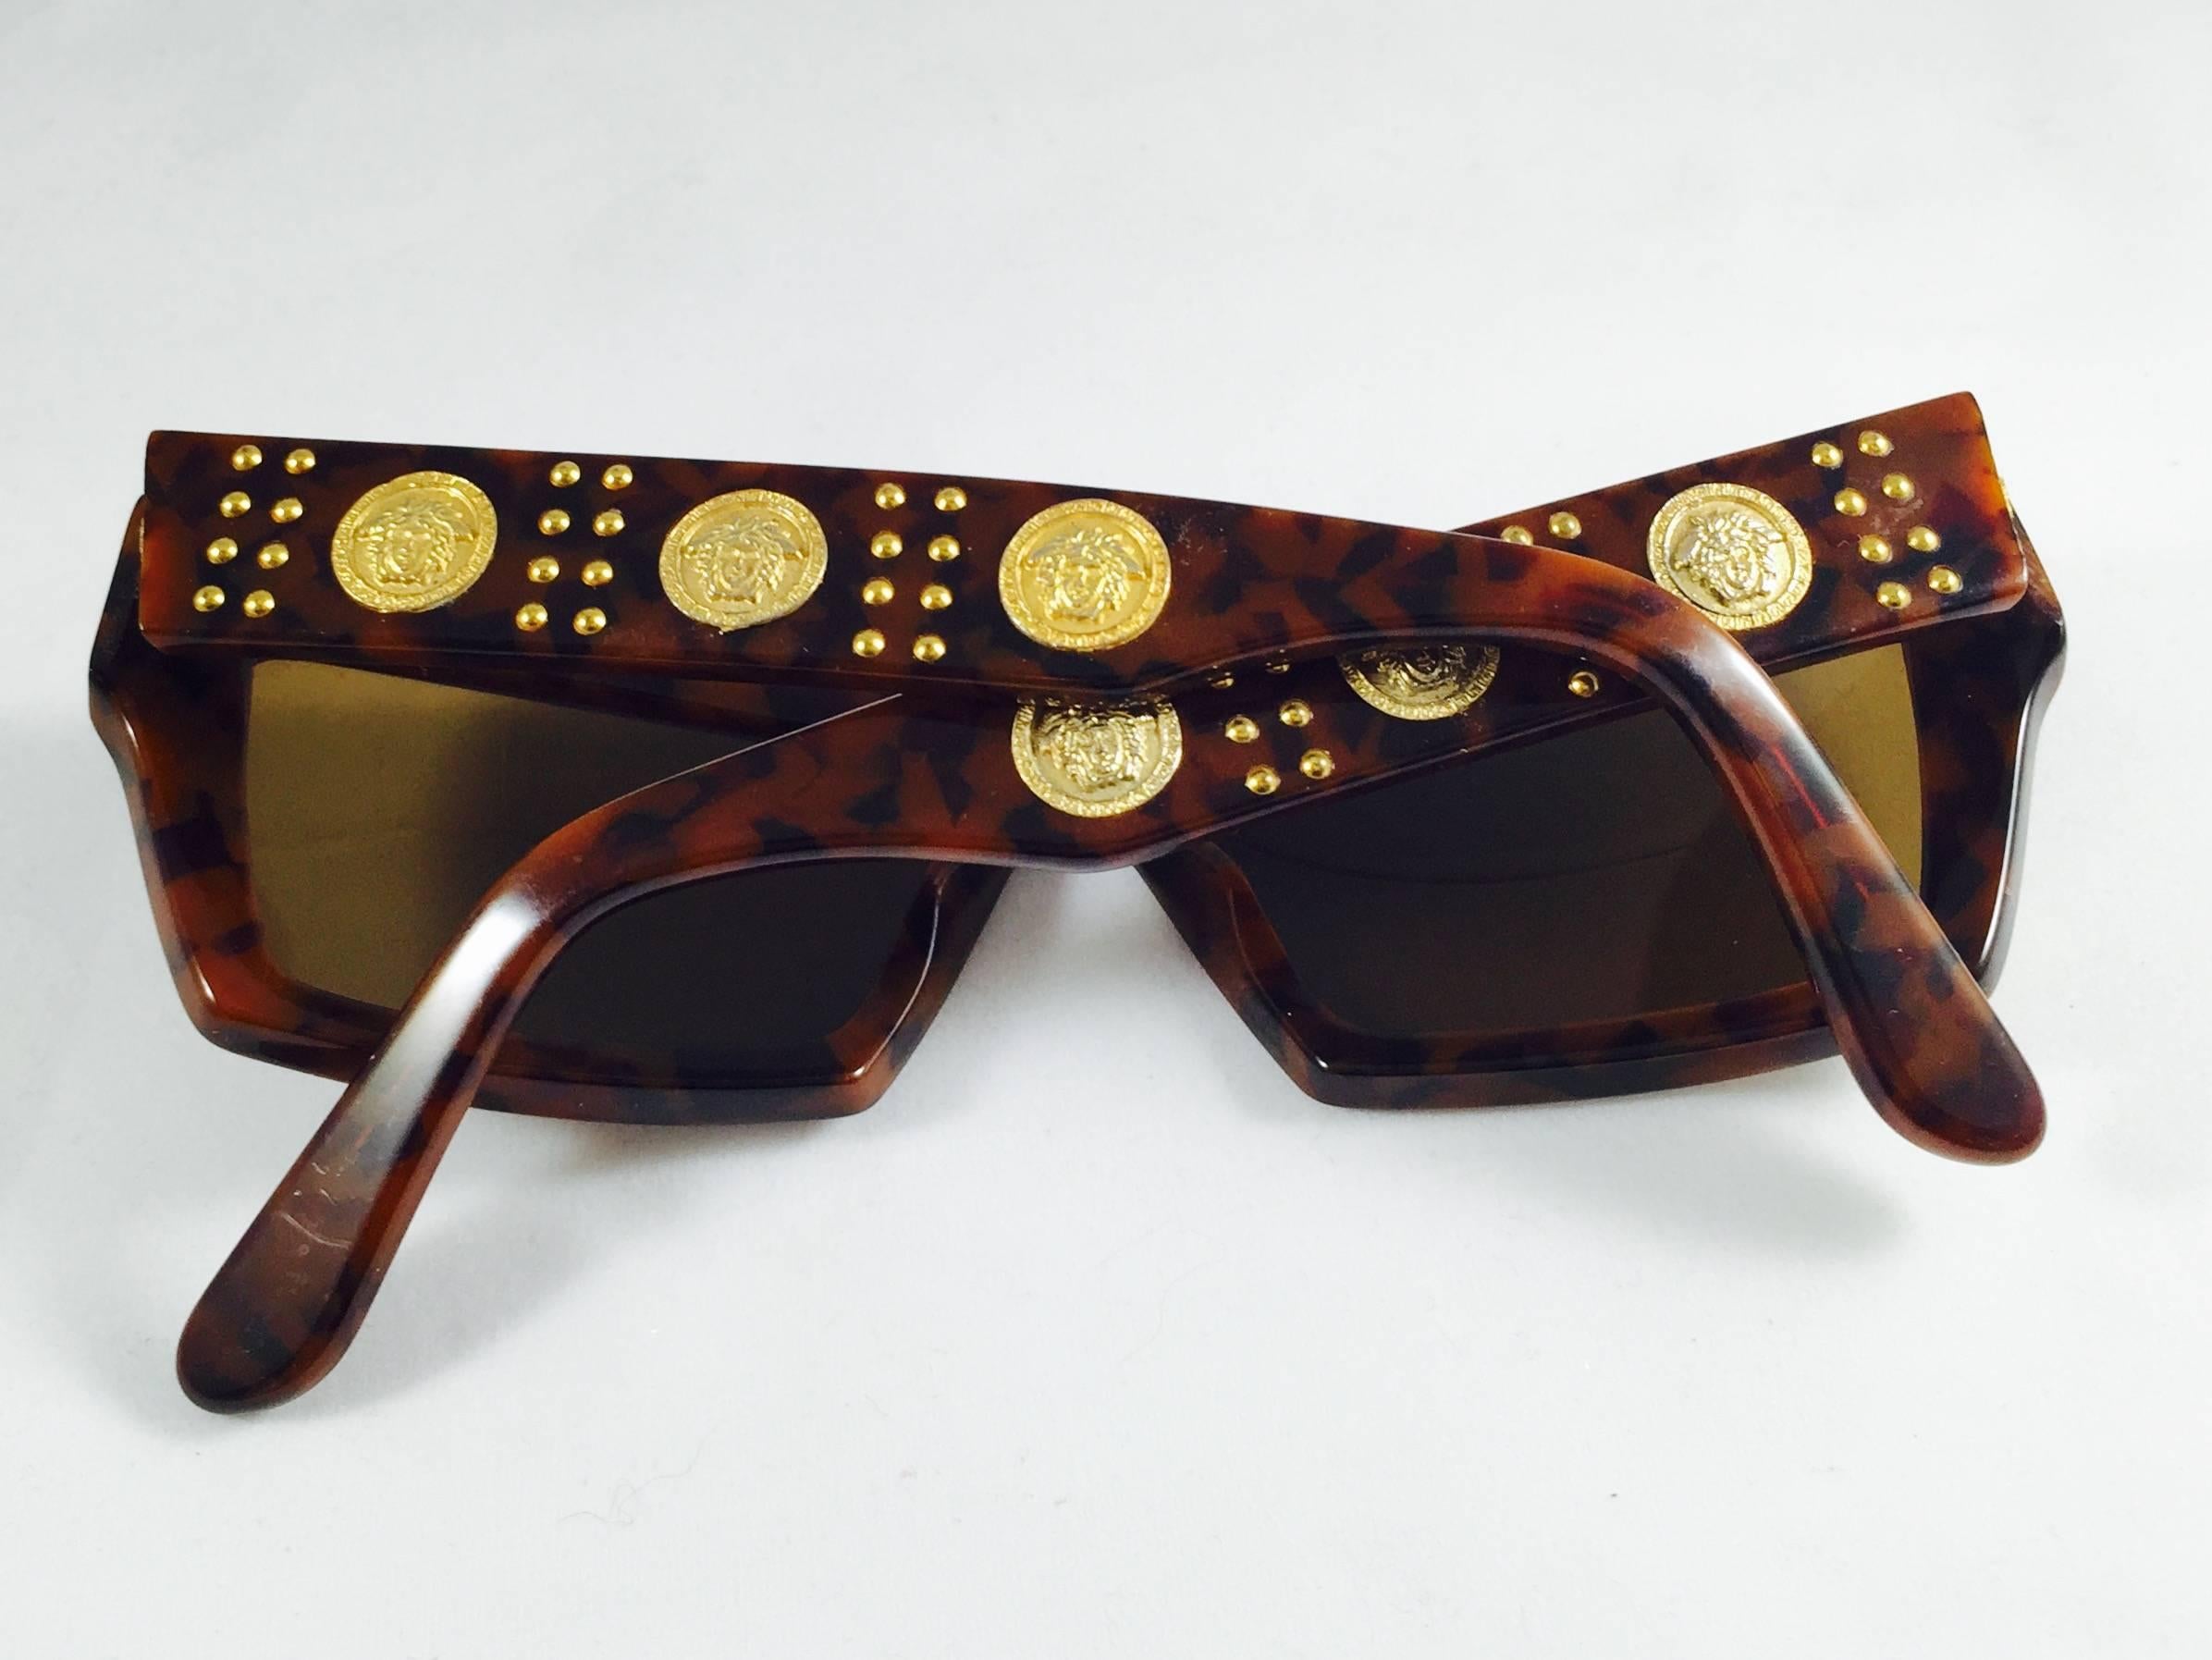 1990s Gianni Versace Tortoise Wayfarer Sunglasses With Mudusa Head Temples In Excellent Condition For Sale In Palm Beach, FL